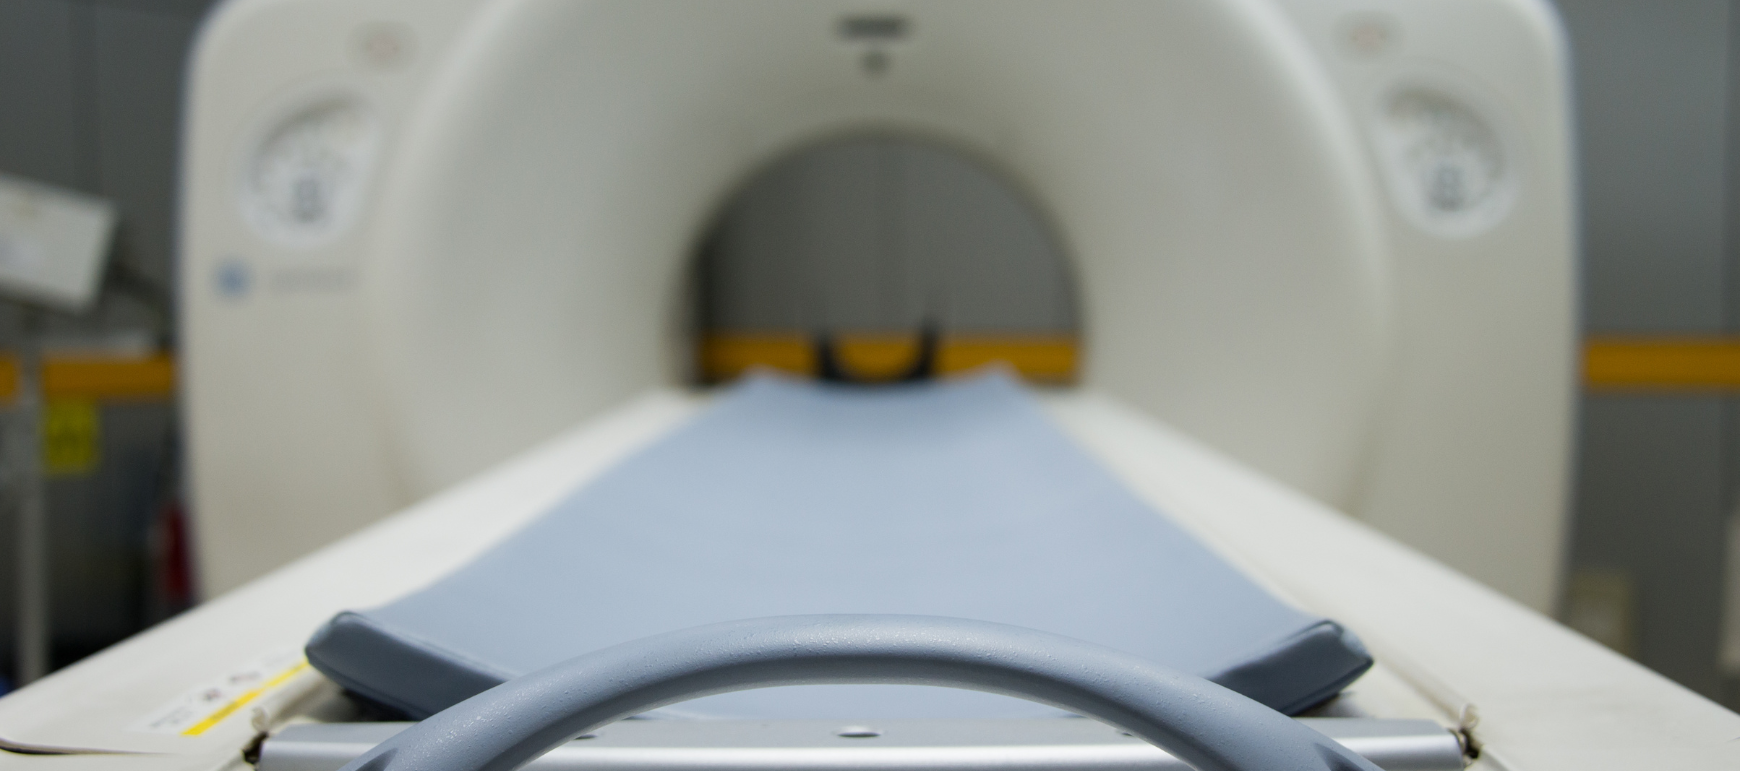 Patient Radiation Safety in CT - What You Need to Know